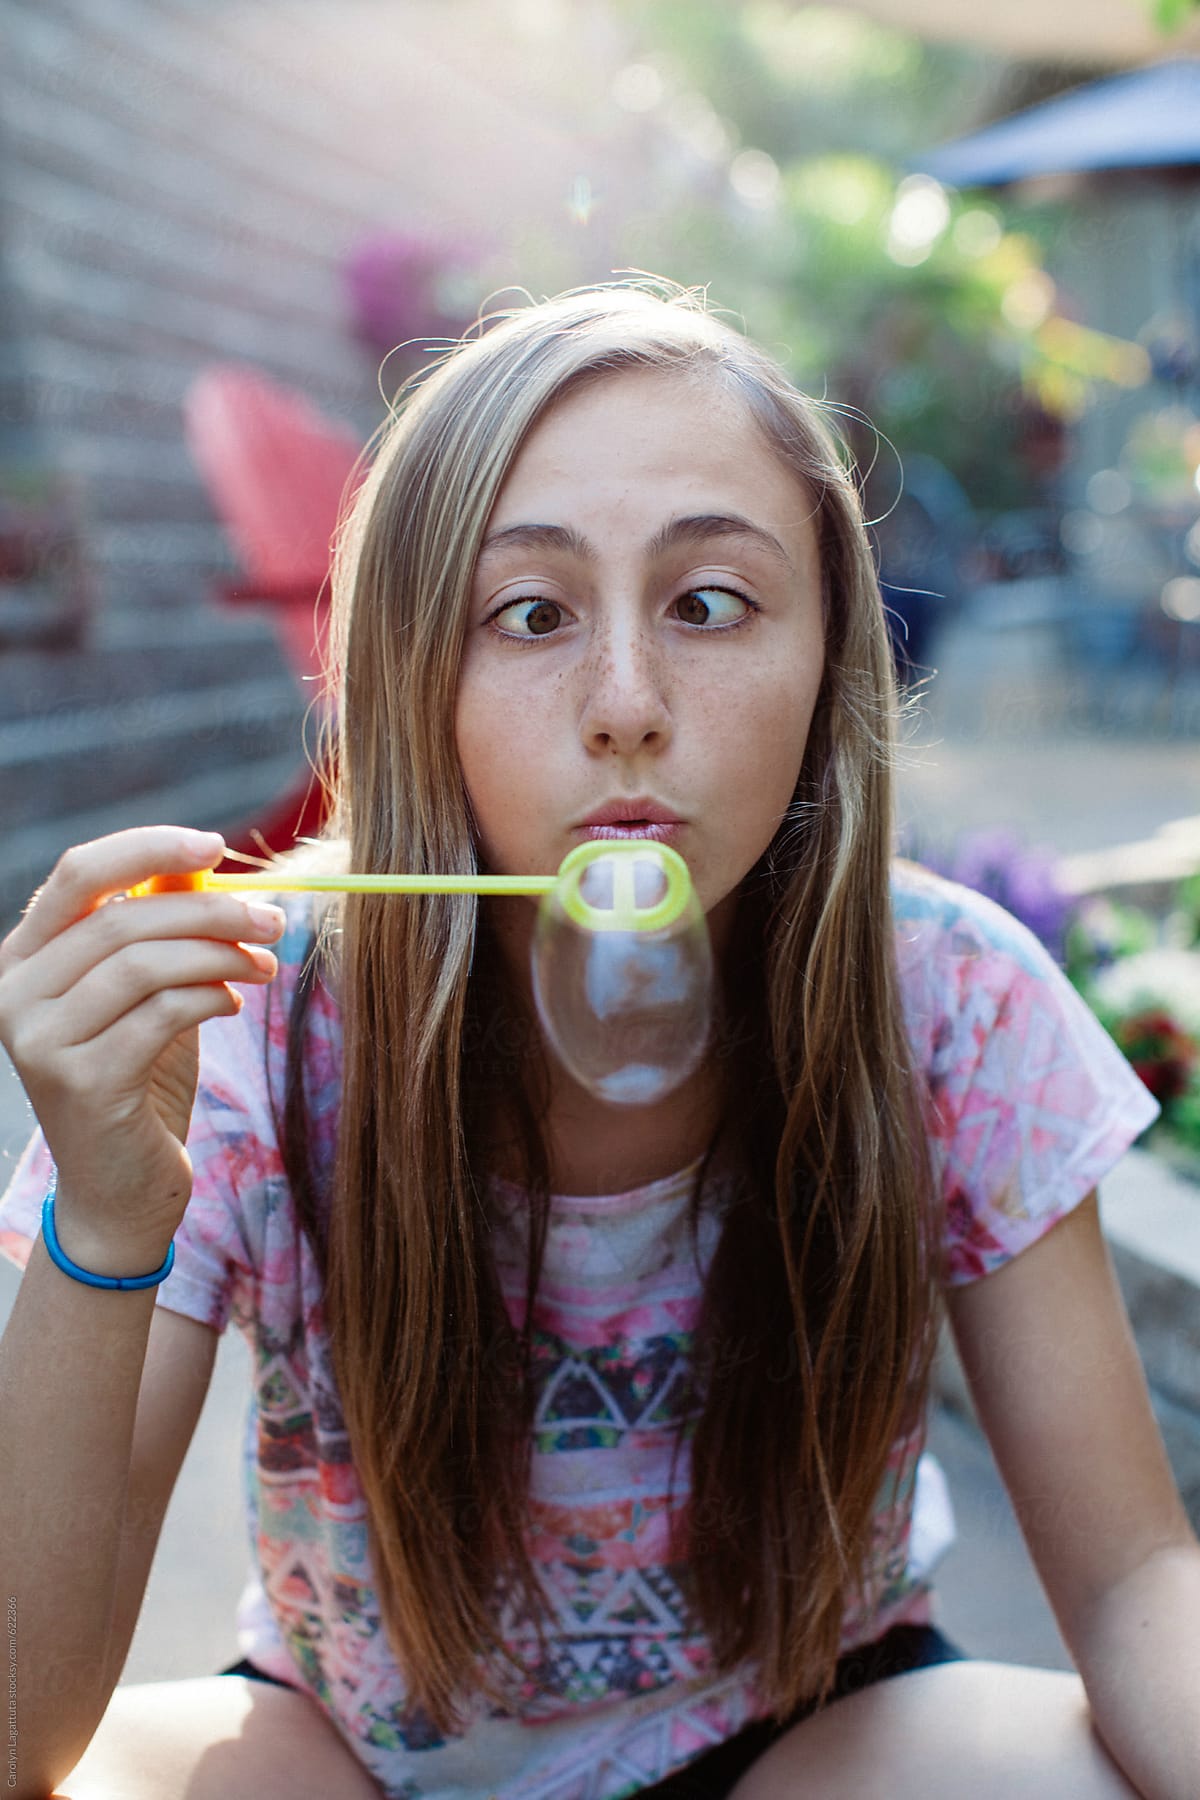 Teenage Girl Blowing Bubbles And Being Silly With Crossed Eyes By Stocksy Contributor Carolyn